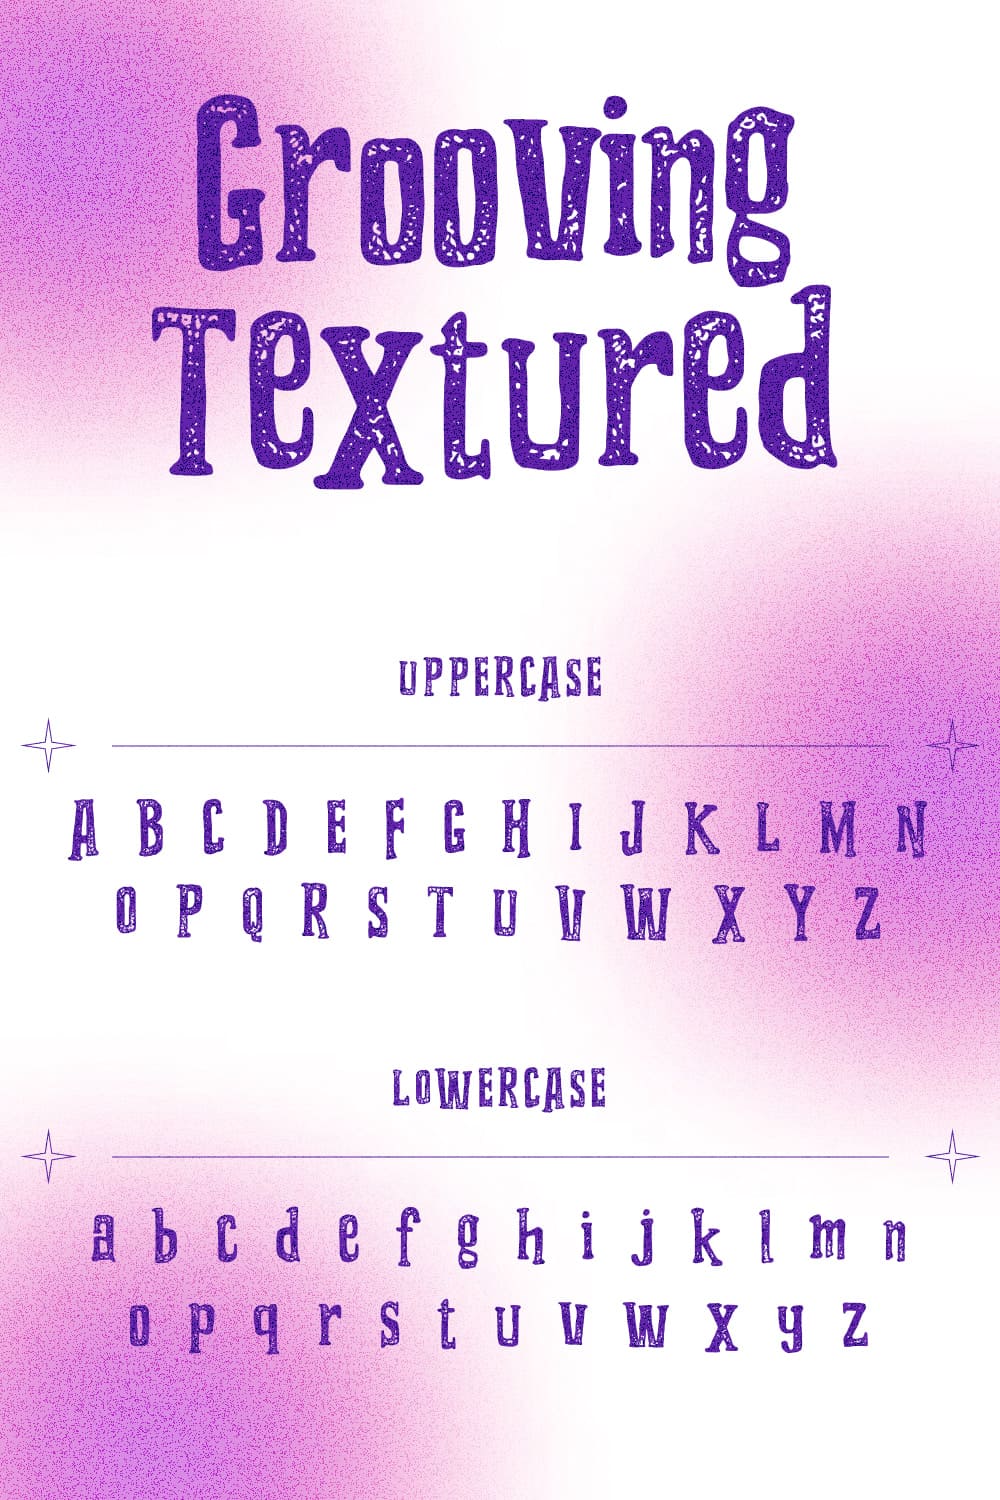 Grooving Textured Free Distressed Font MasterBundles Pinterest uppercase and lowercase preview.